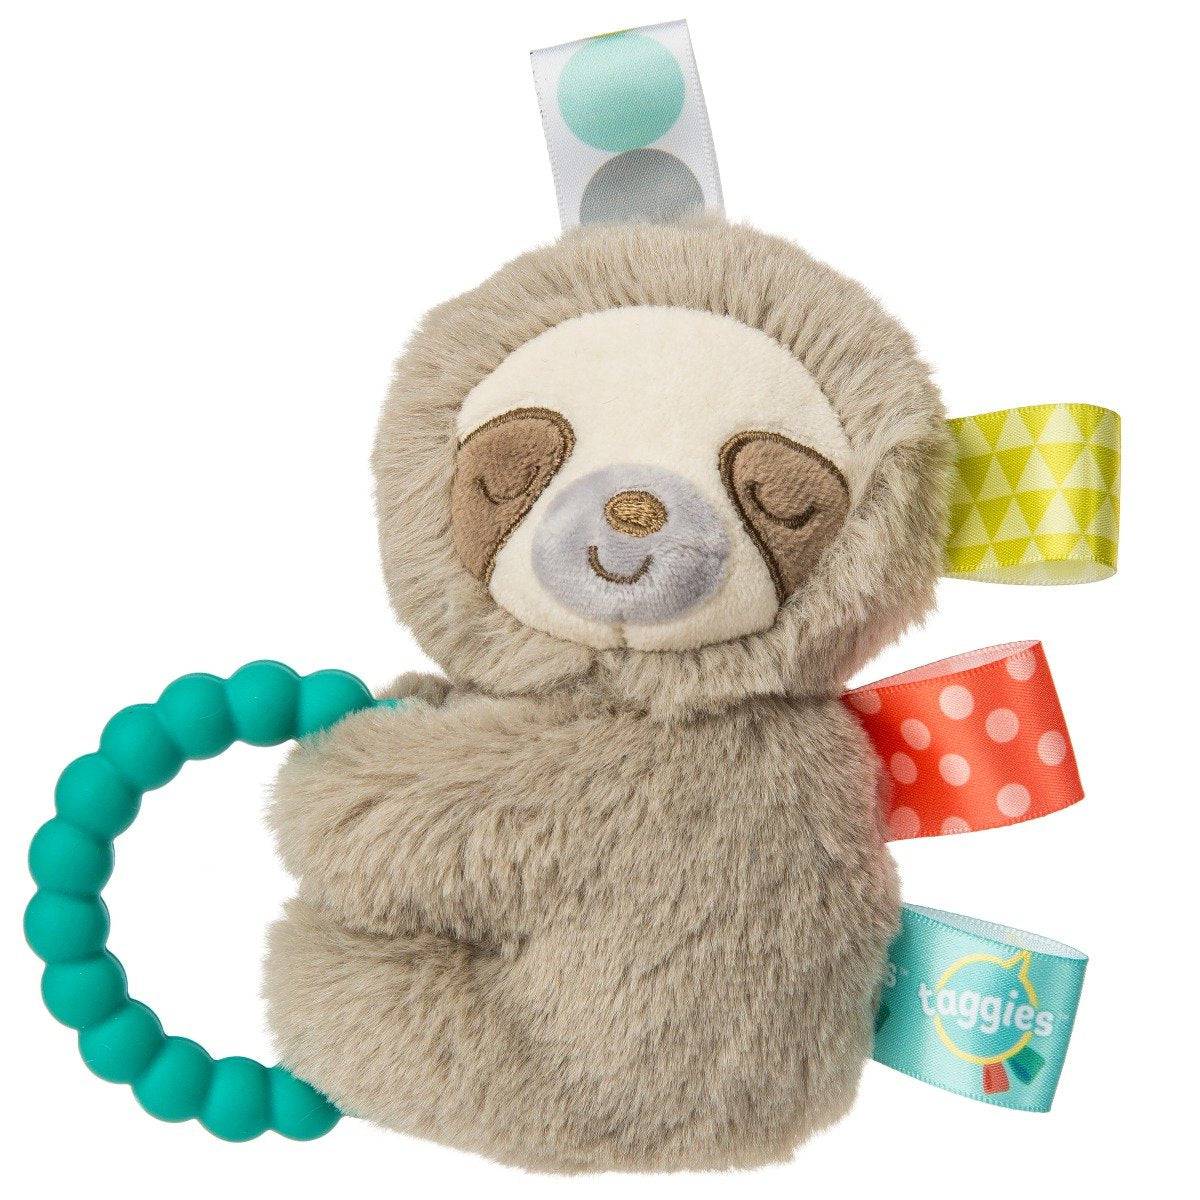 Taggies Molasses Sloth Rattle - Twinkle Twinkle Little One